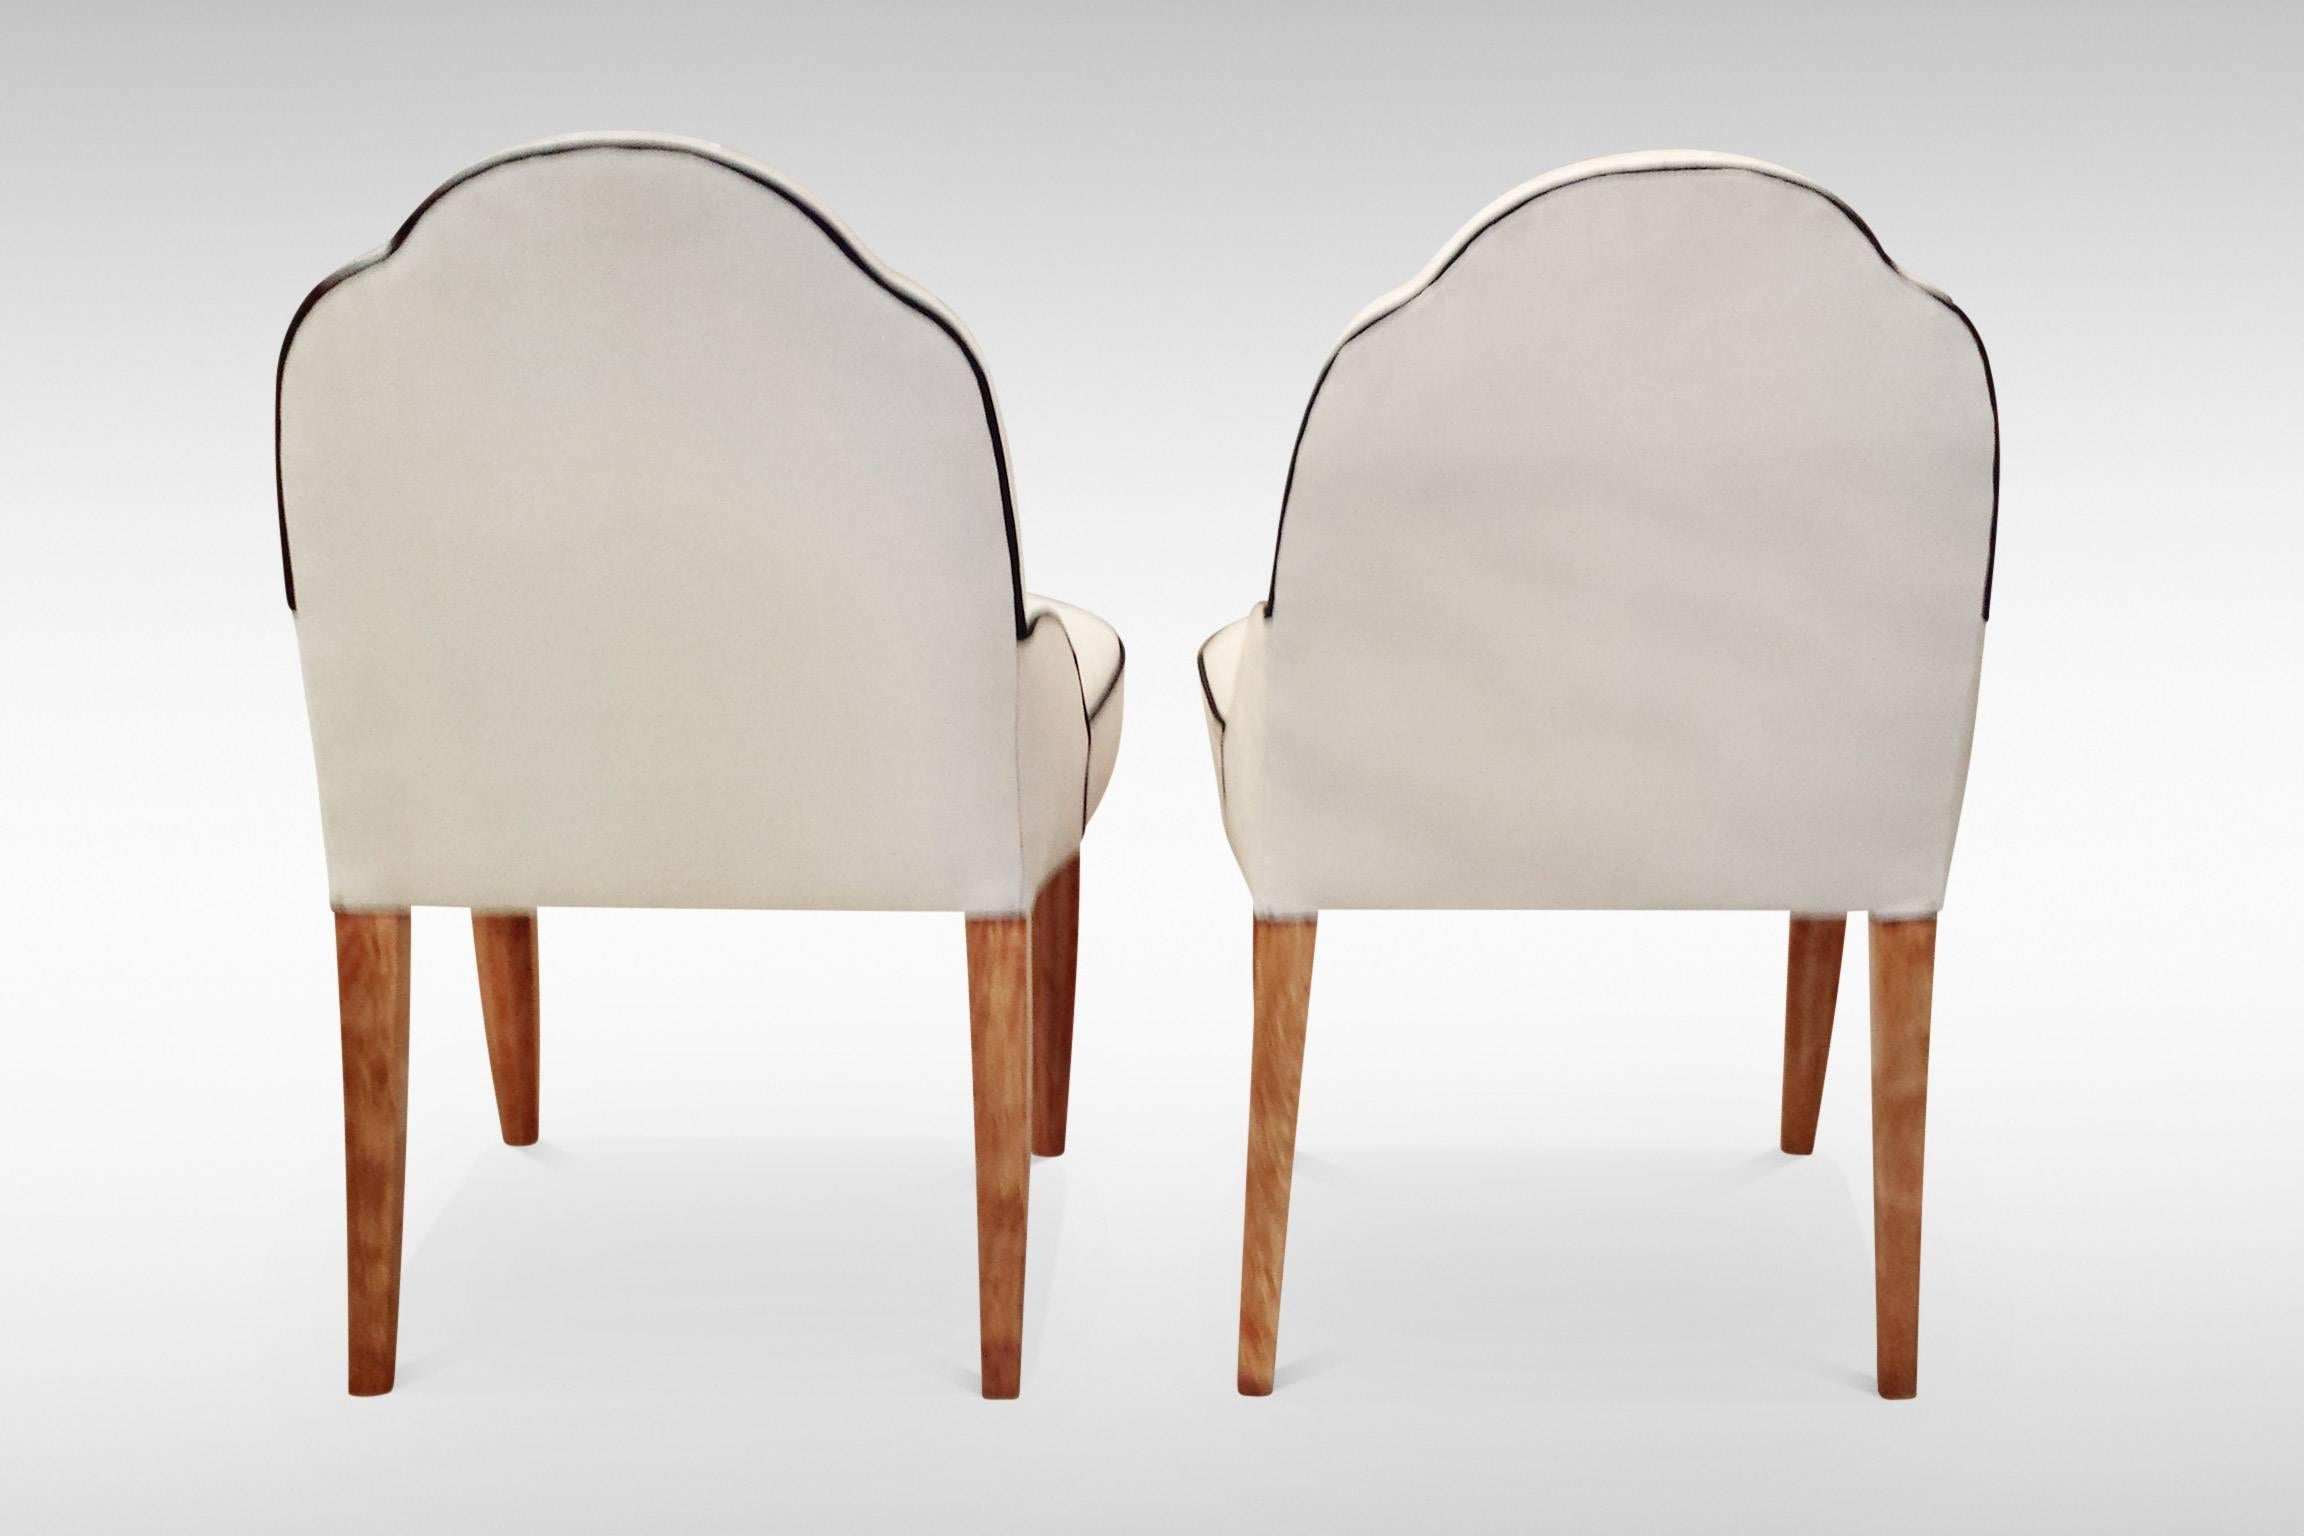 Early 20th Century Pair of French Art Deco Side Chairs